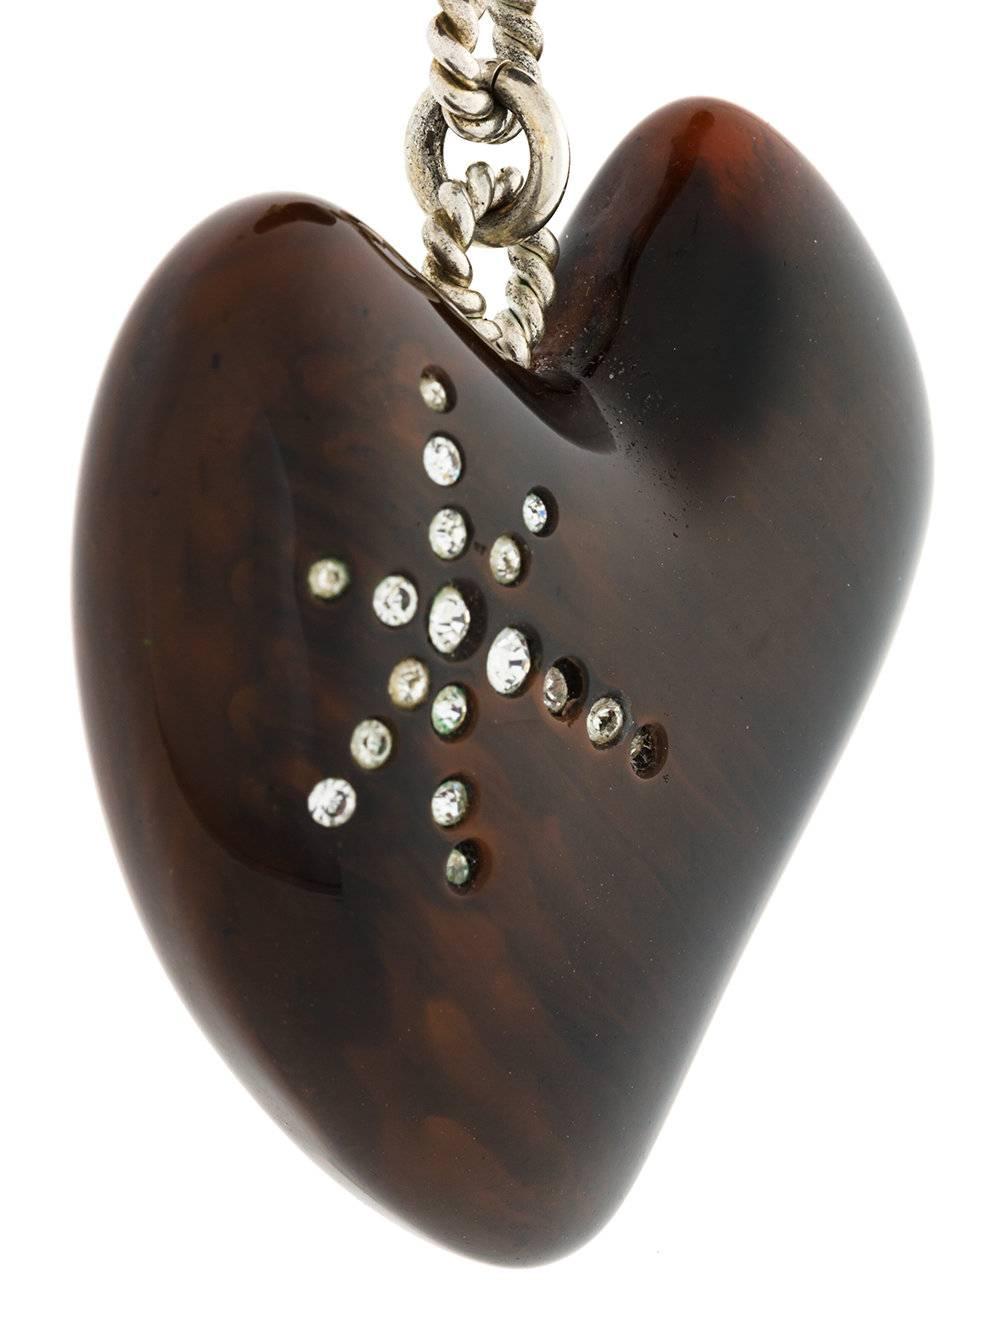 In love with this very unusual & collectable Christian Lacroix vintage Love hearts earrings. c.1990. Really gorgeous. Made of lacquered brown chocolate resin and crystal stones. 

Marked : Christian Lacroix Made in France

Size : 3.8 x 8 cm - 1.5 x